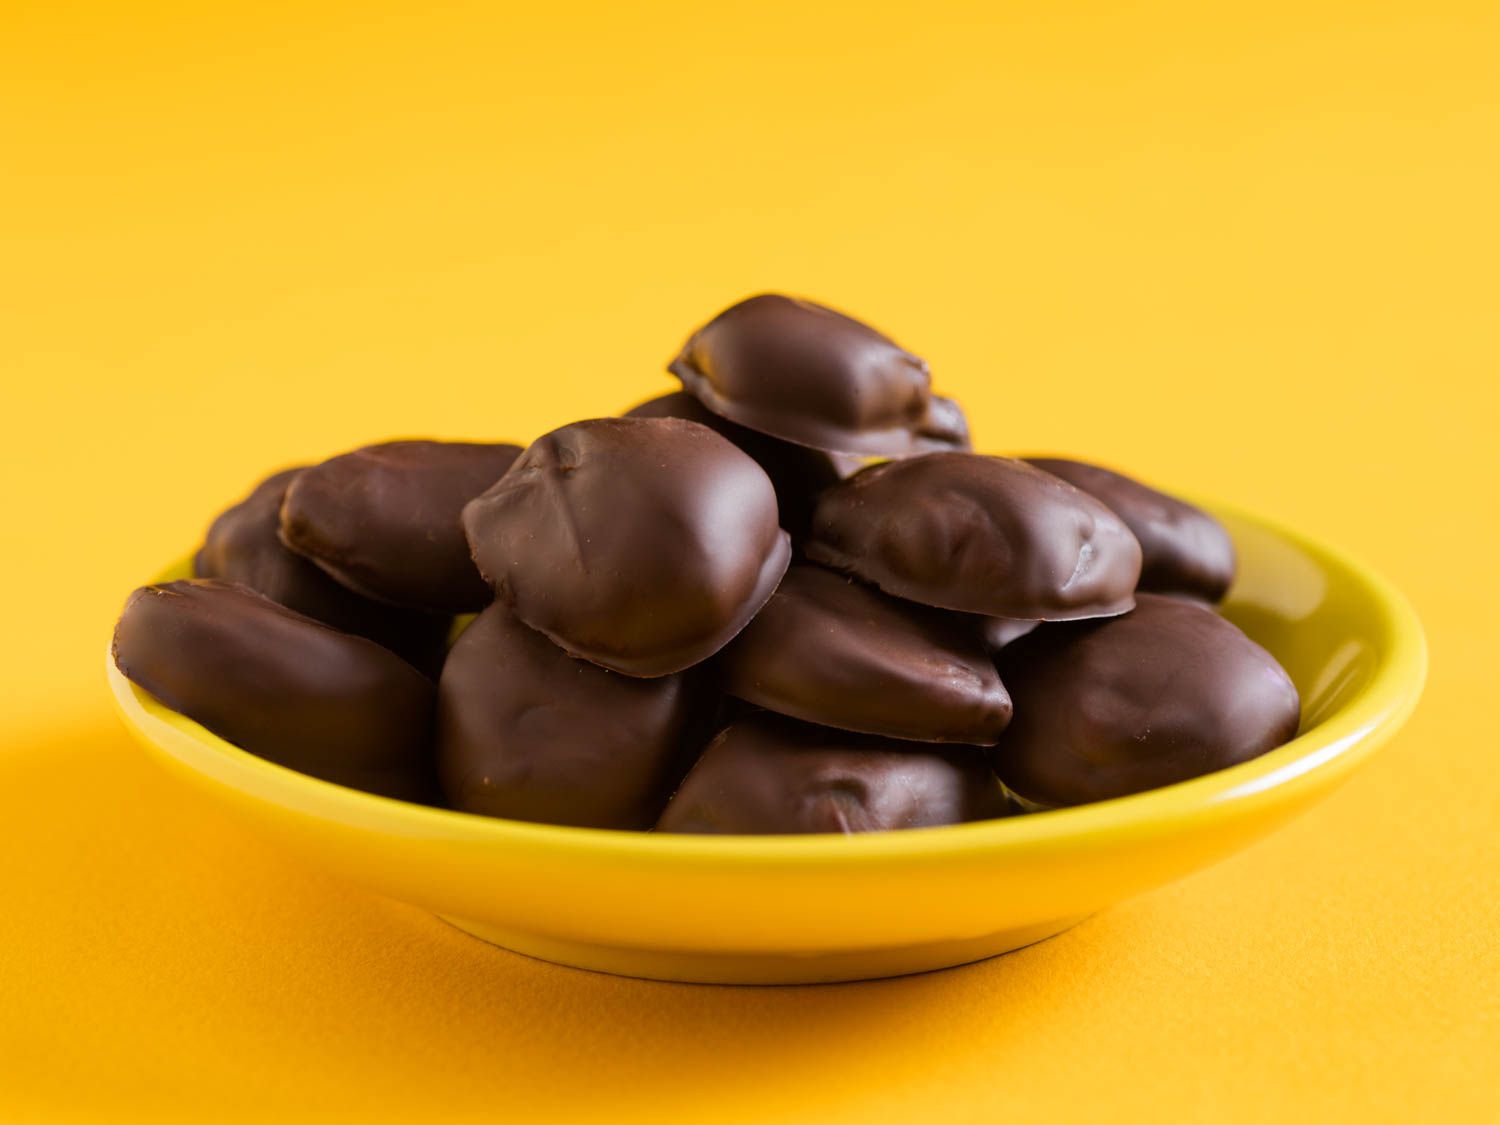 A yellow dish of homemade milk duds set on a yellow background.